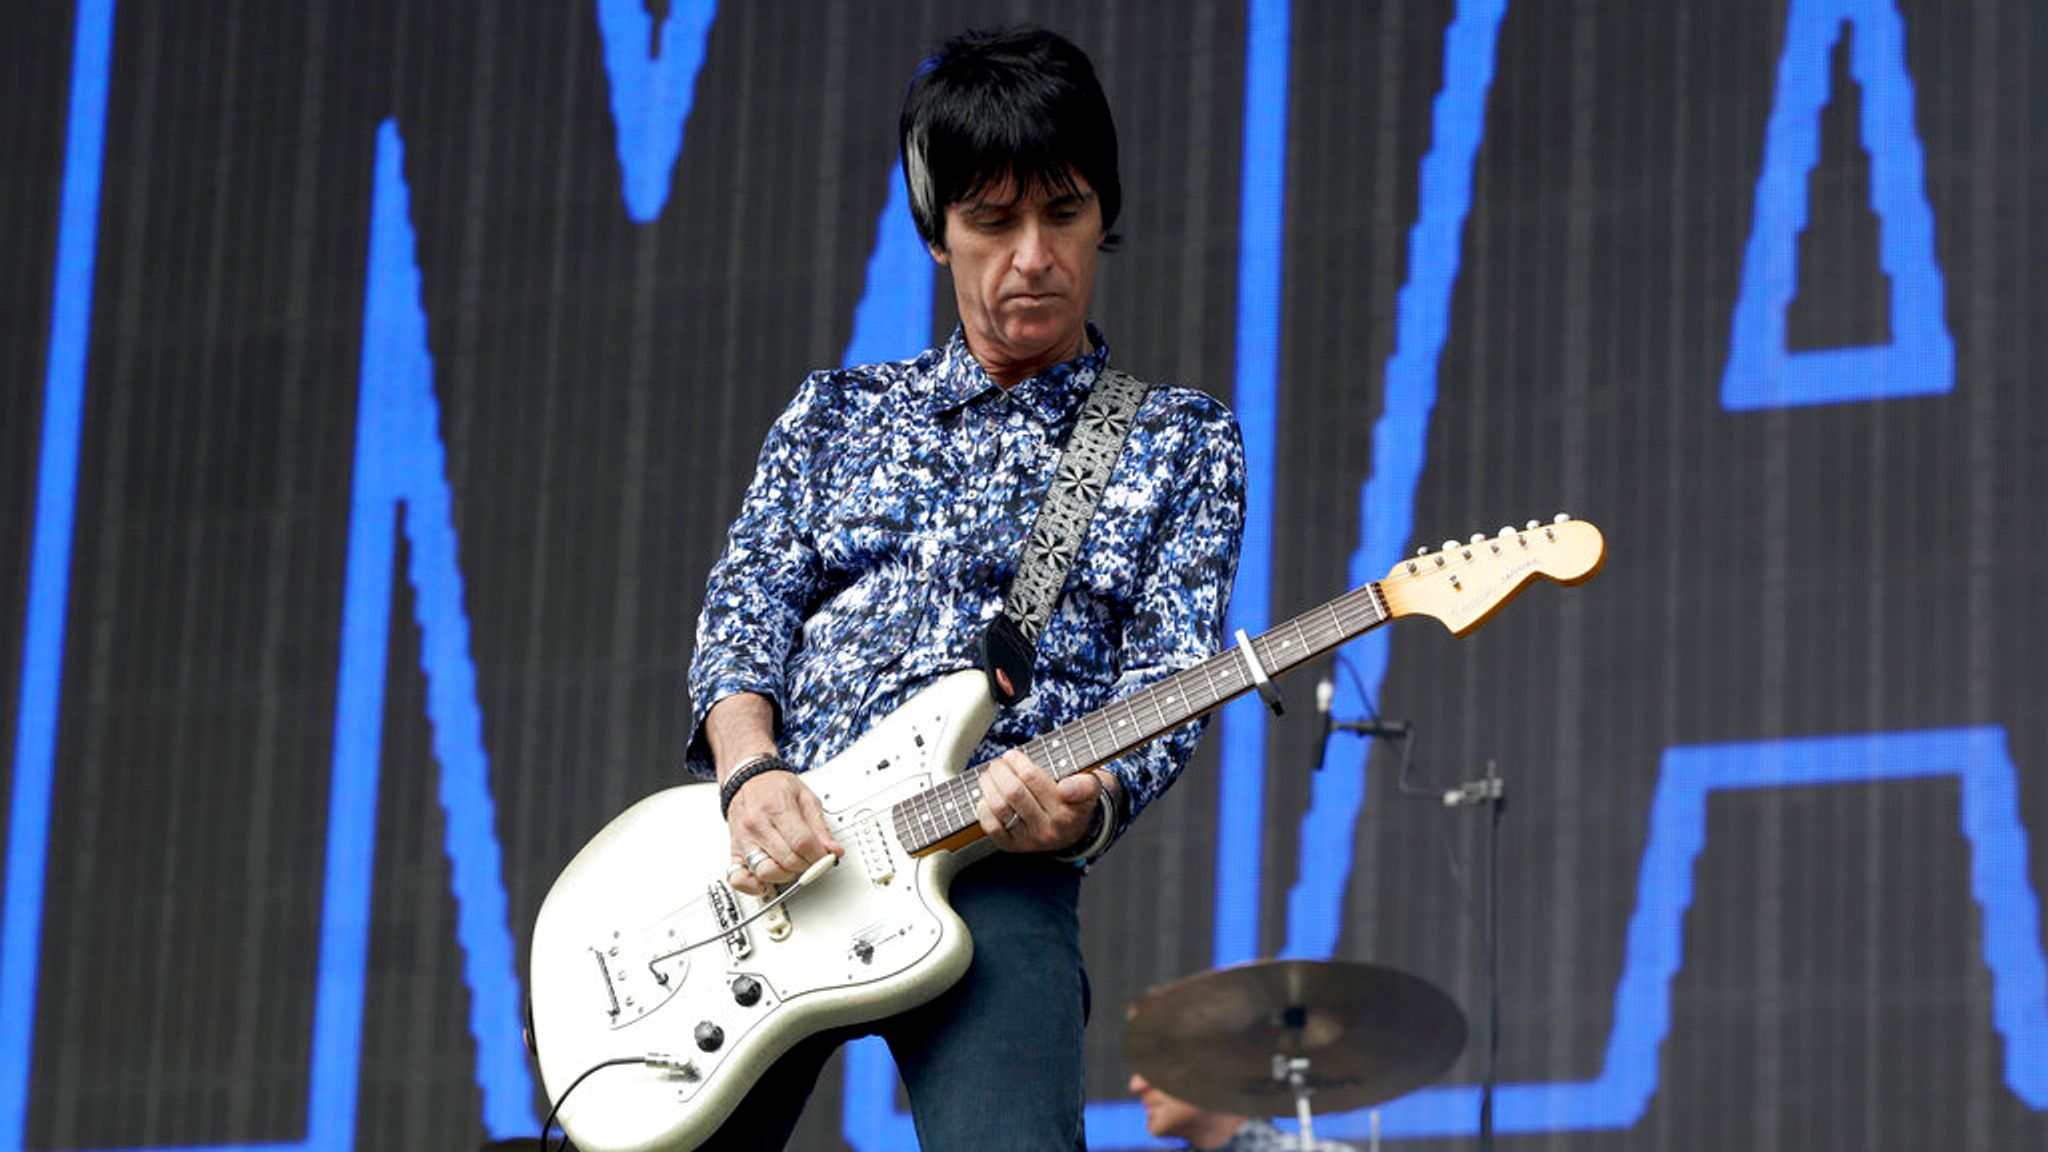 Musician Johnny Marr performs at the Other Stage on the fourth day of the Glastonbury Festival at Worthy Farm, Somerset, England, Saturday, June 29, 2019. (Photo by Grant Pollard/Invision/AP)